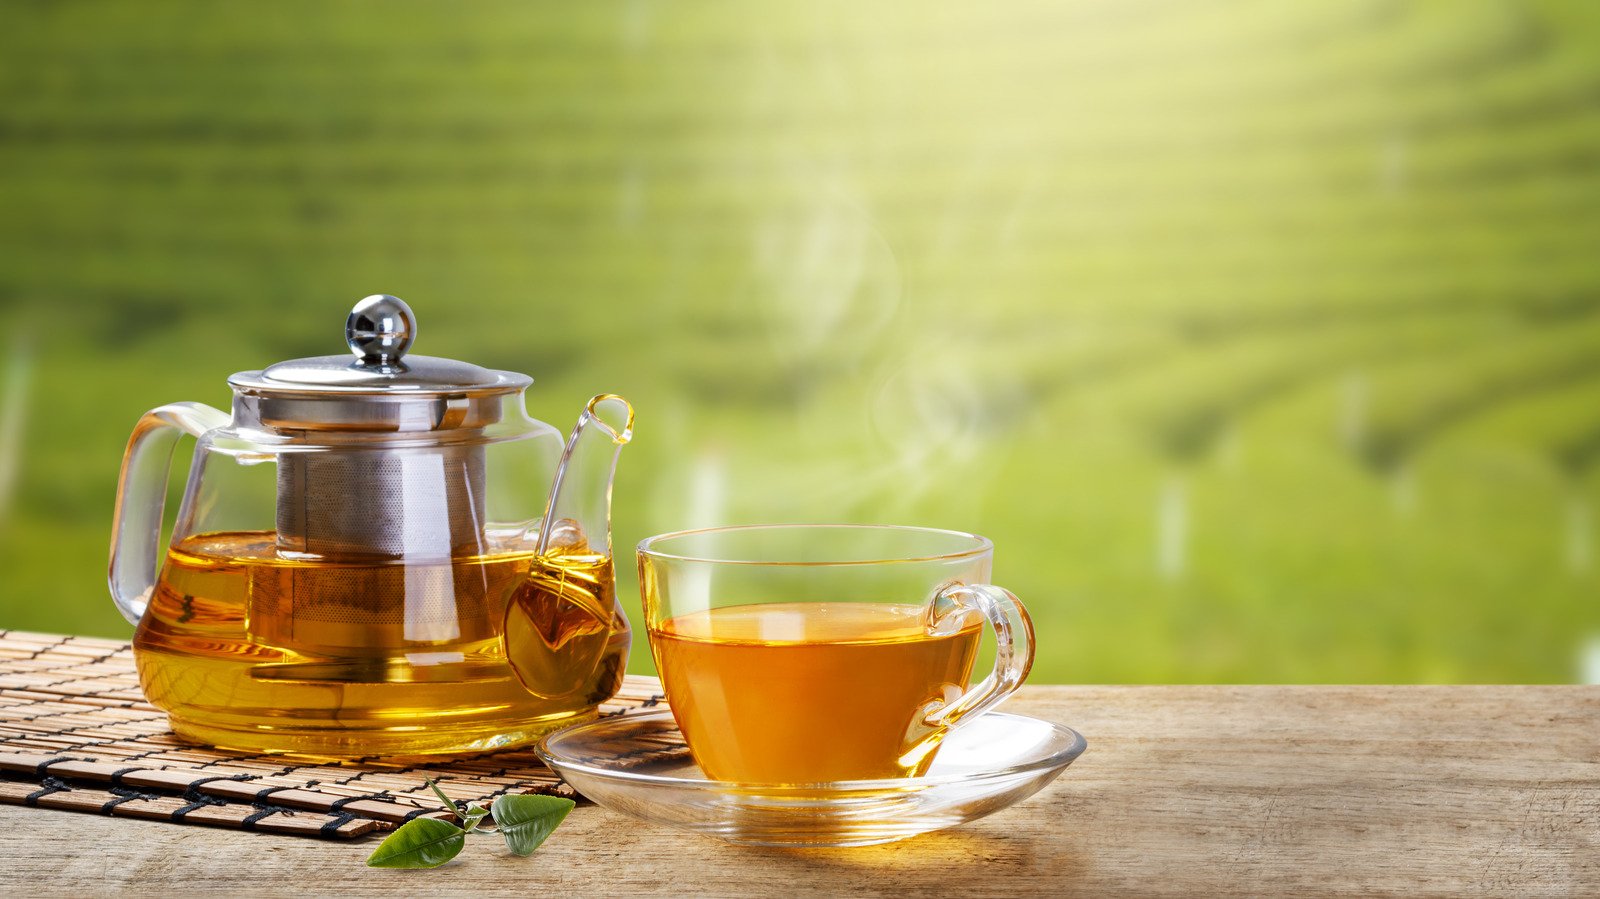 Why You May Want To Avoid Green Tea When Going Through Chemotherapy